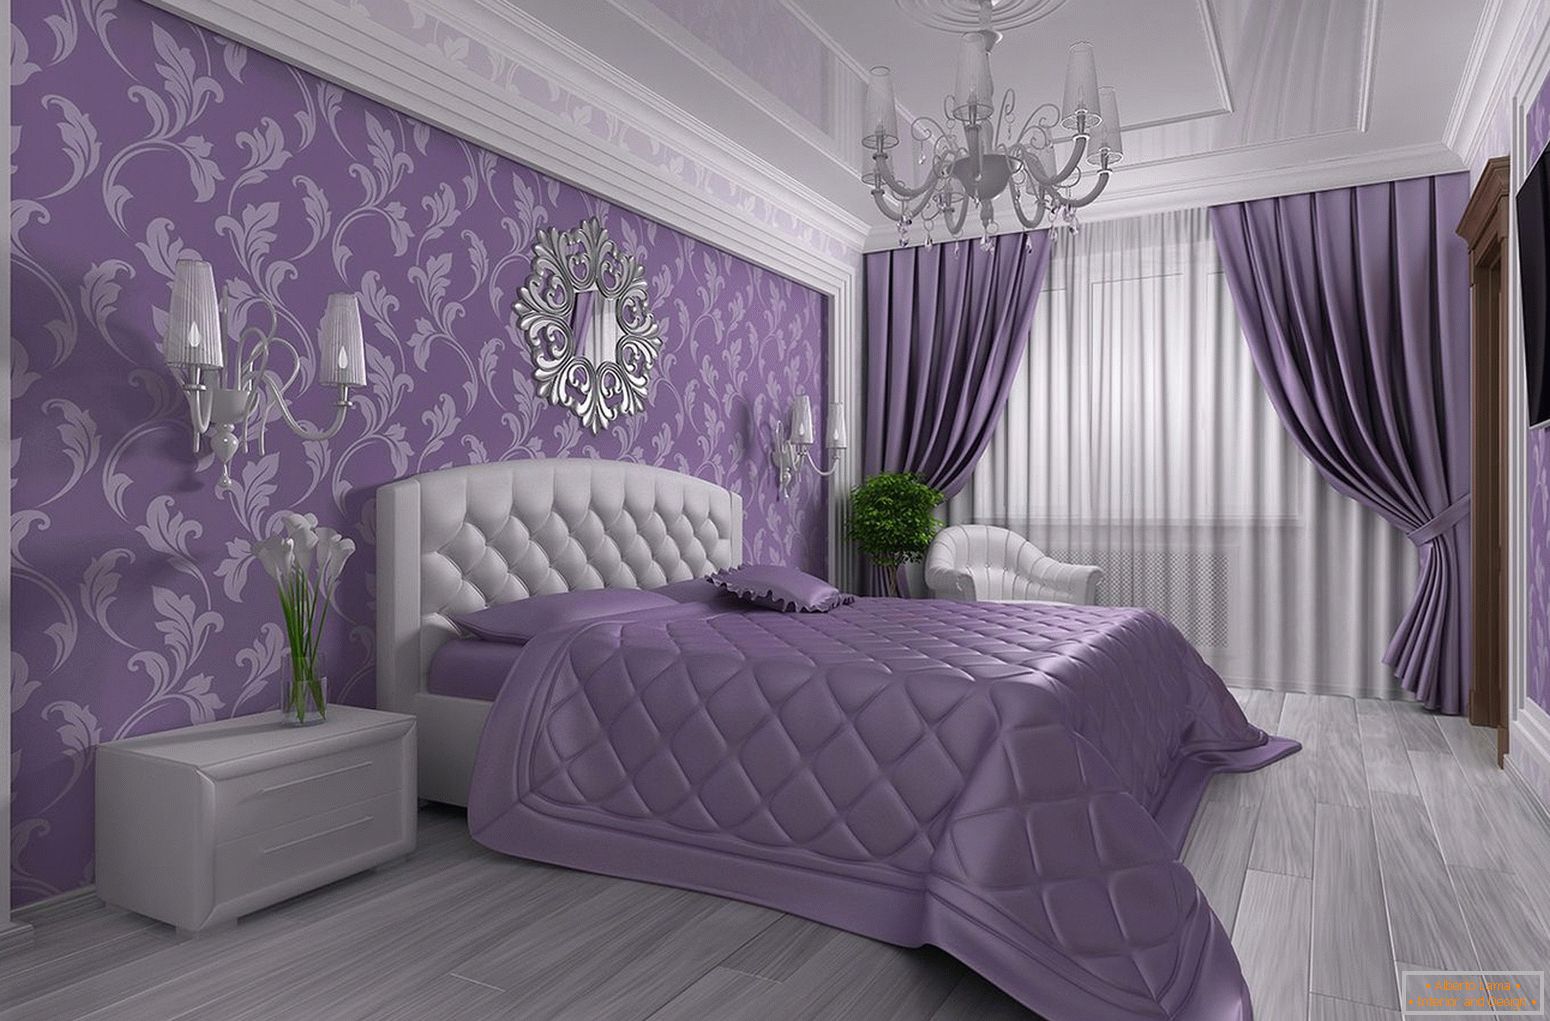 Mauve bedspread on the bed